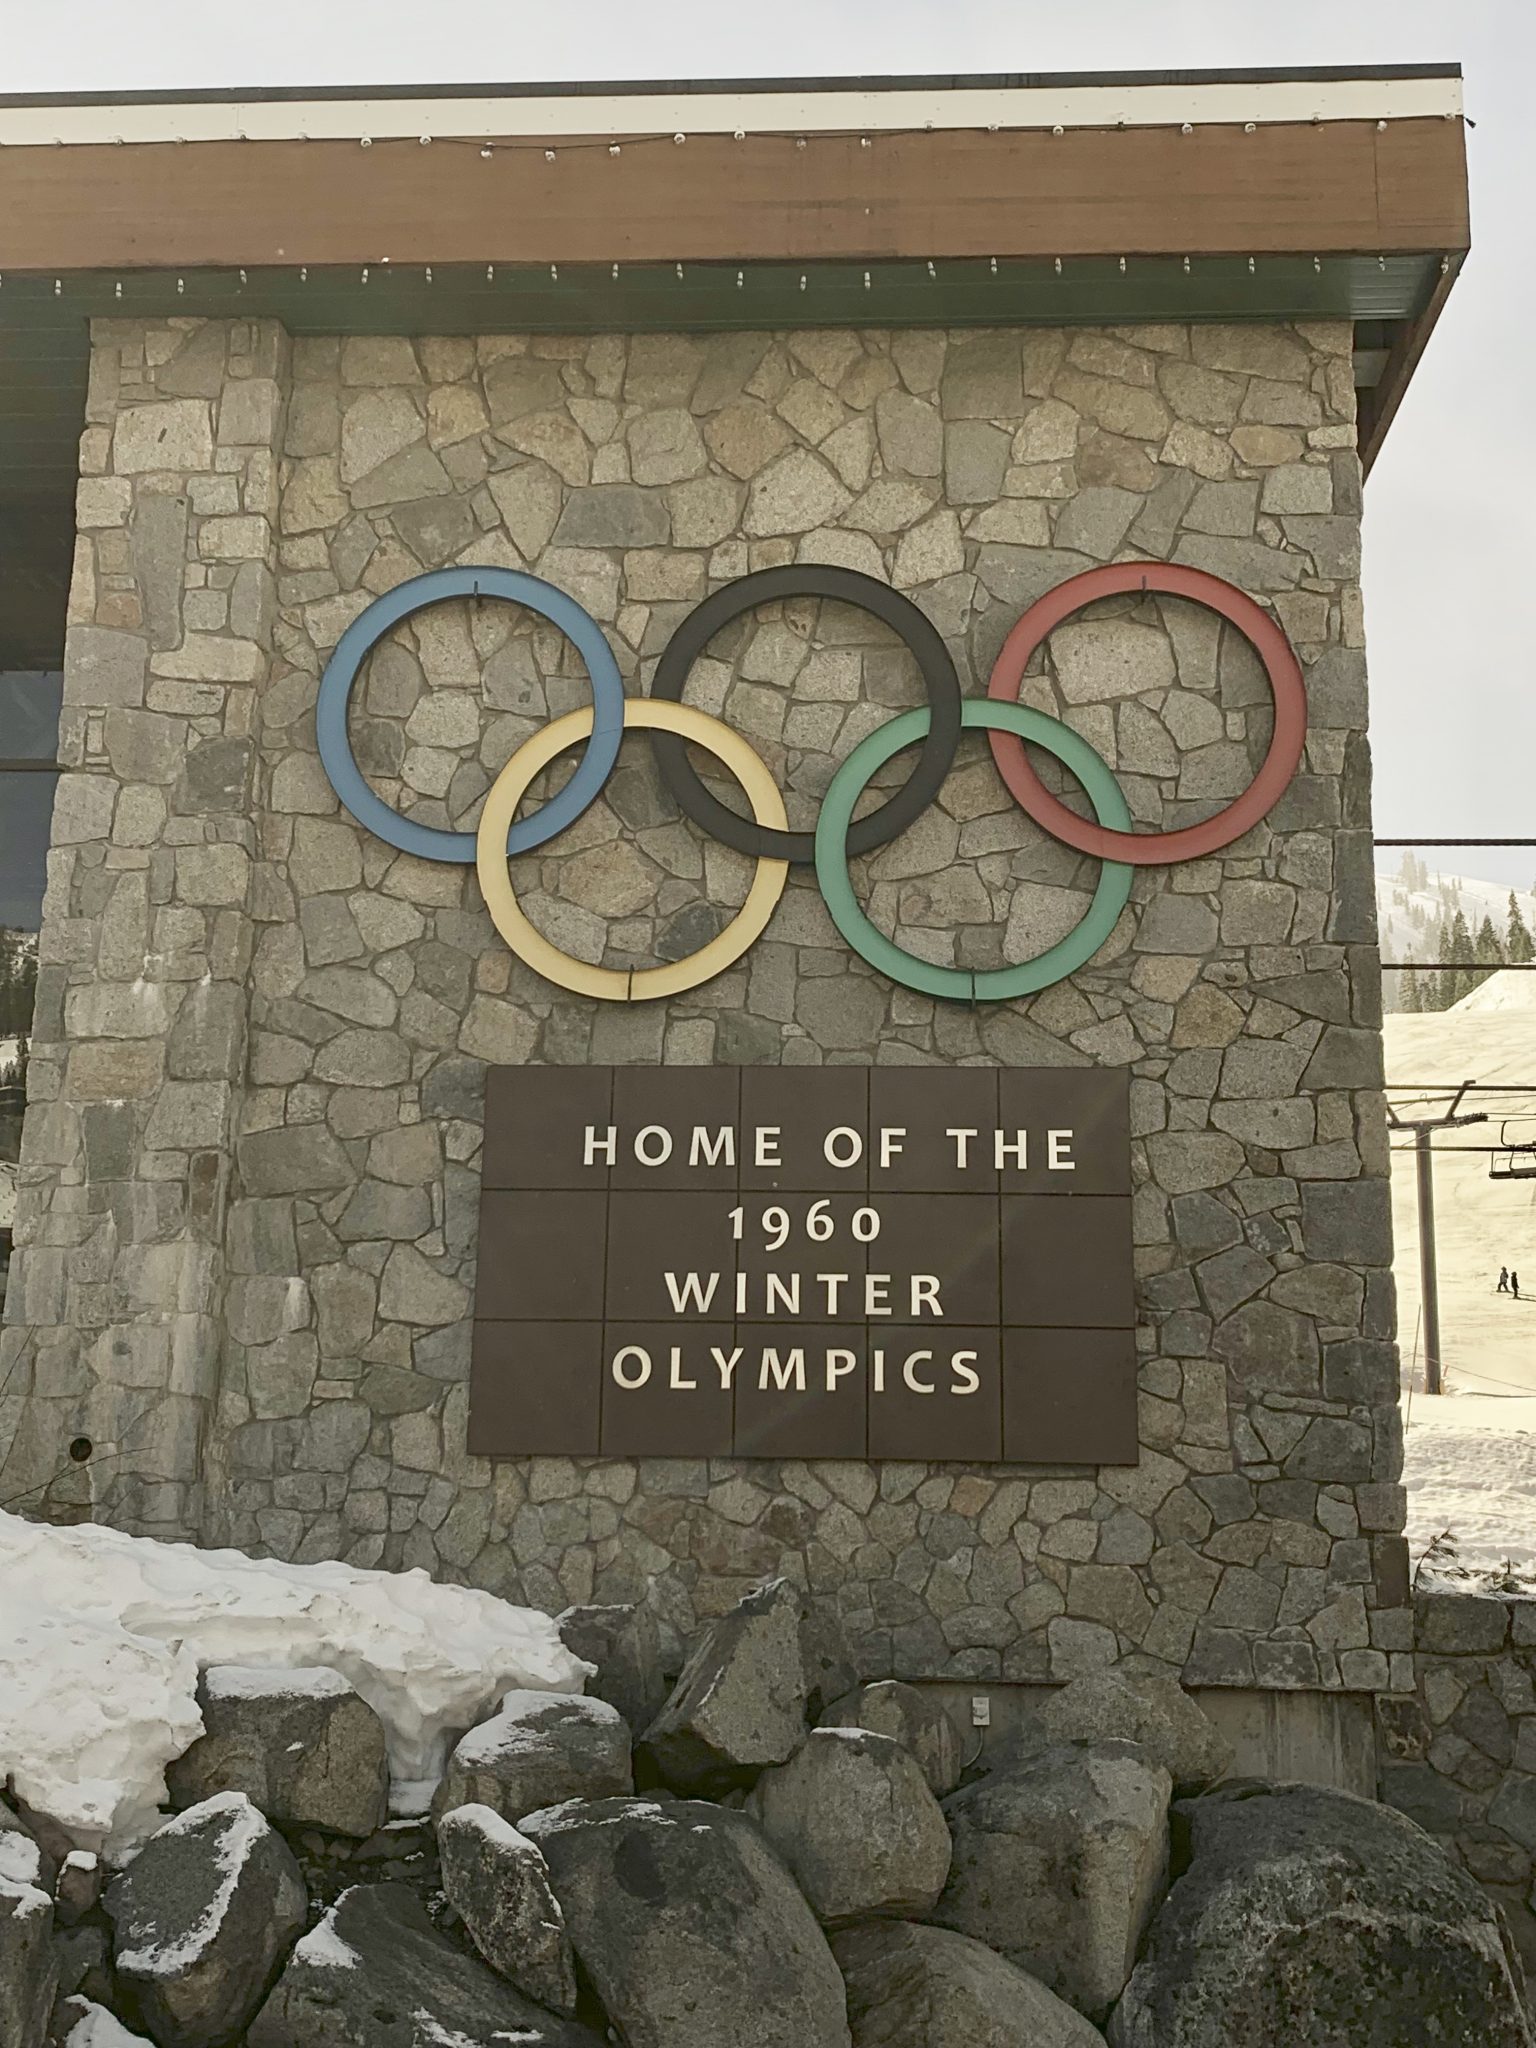 Squaw Valley Resort, which offers spring skiing until July, was the home of the 1960 Winter Olympics.